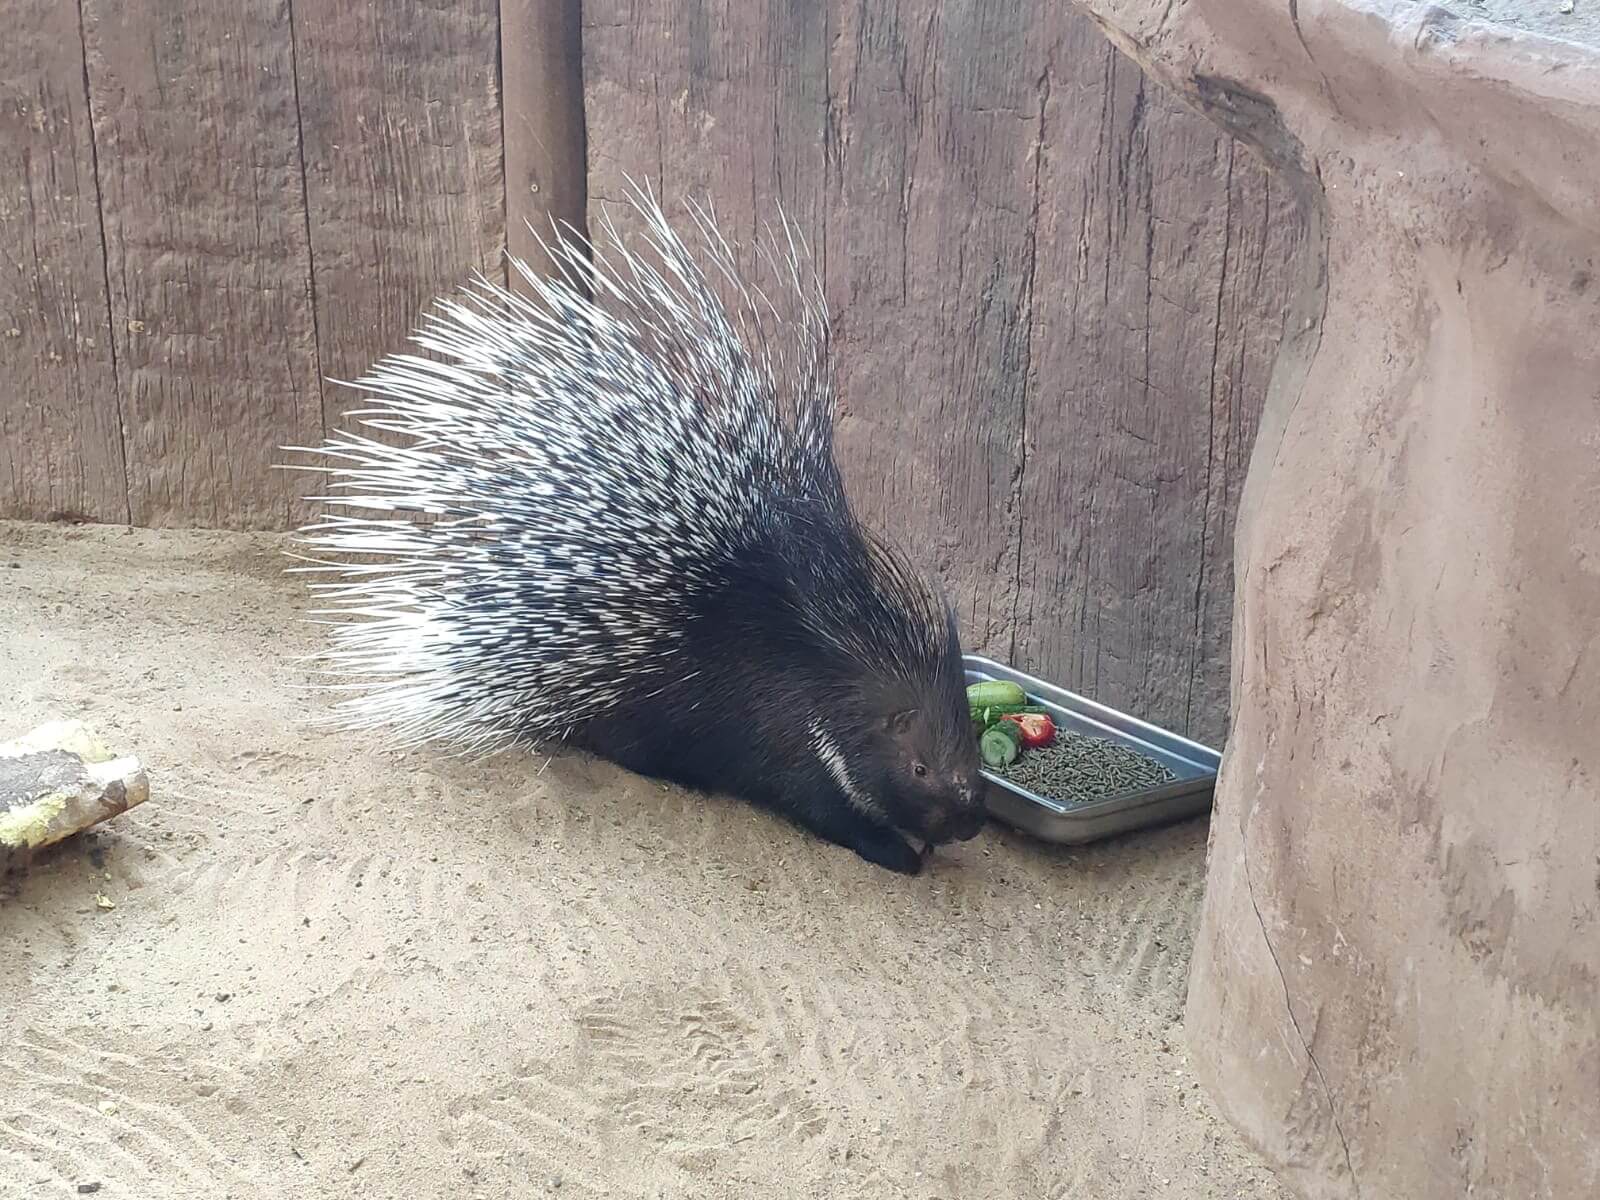 The crested porcupine